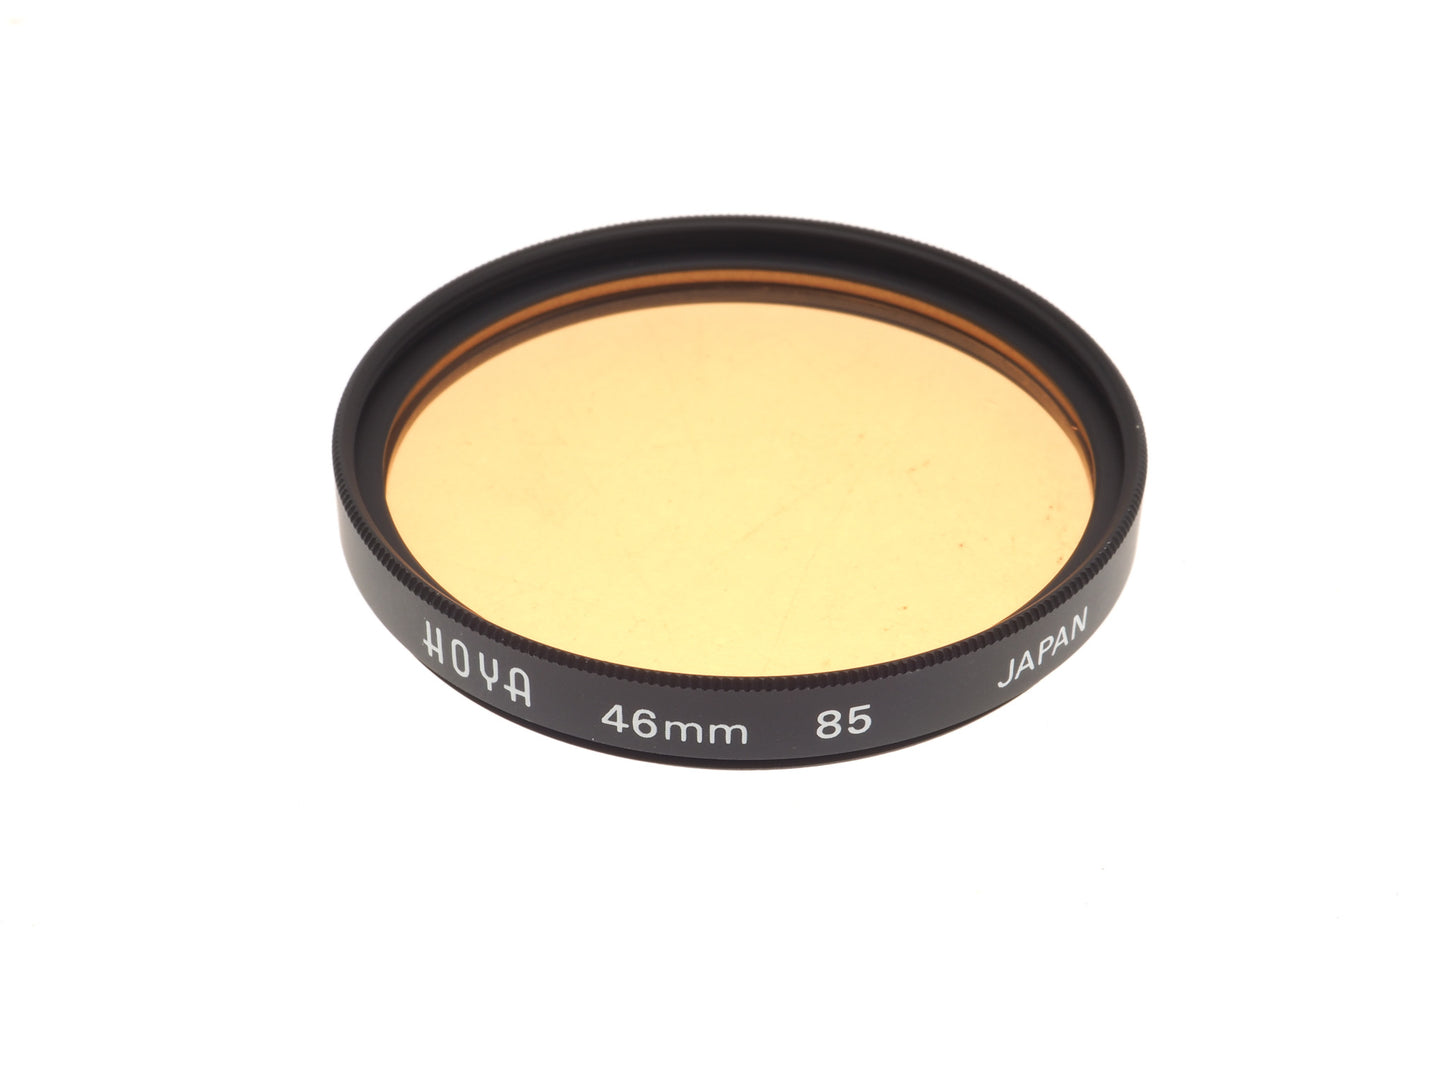 Hoya 46mm 85 Color Conversion Filter - Accessory